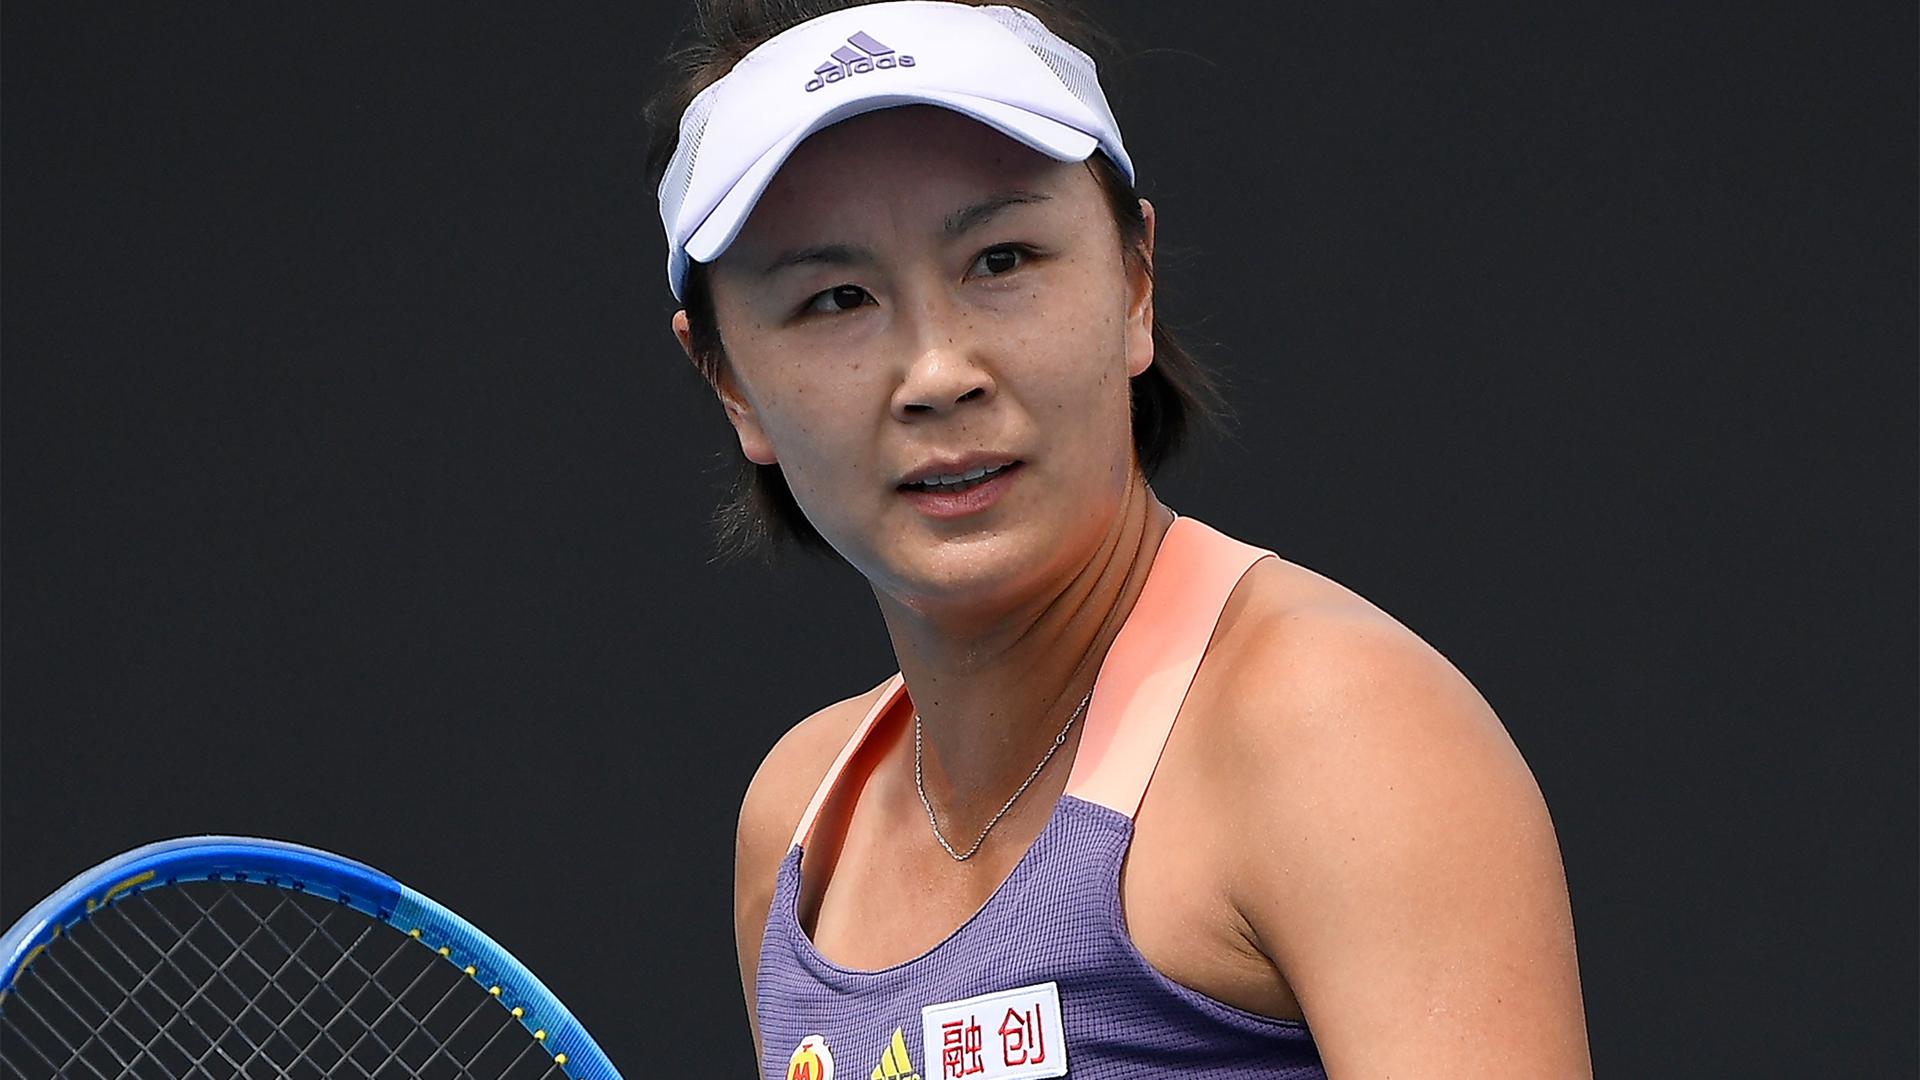 China's Peng Shuai reacts during her first round singles match against Japan's Nao Hibino at the Australian Open tennis championship in Melbourne, Australia